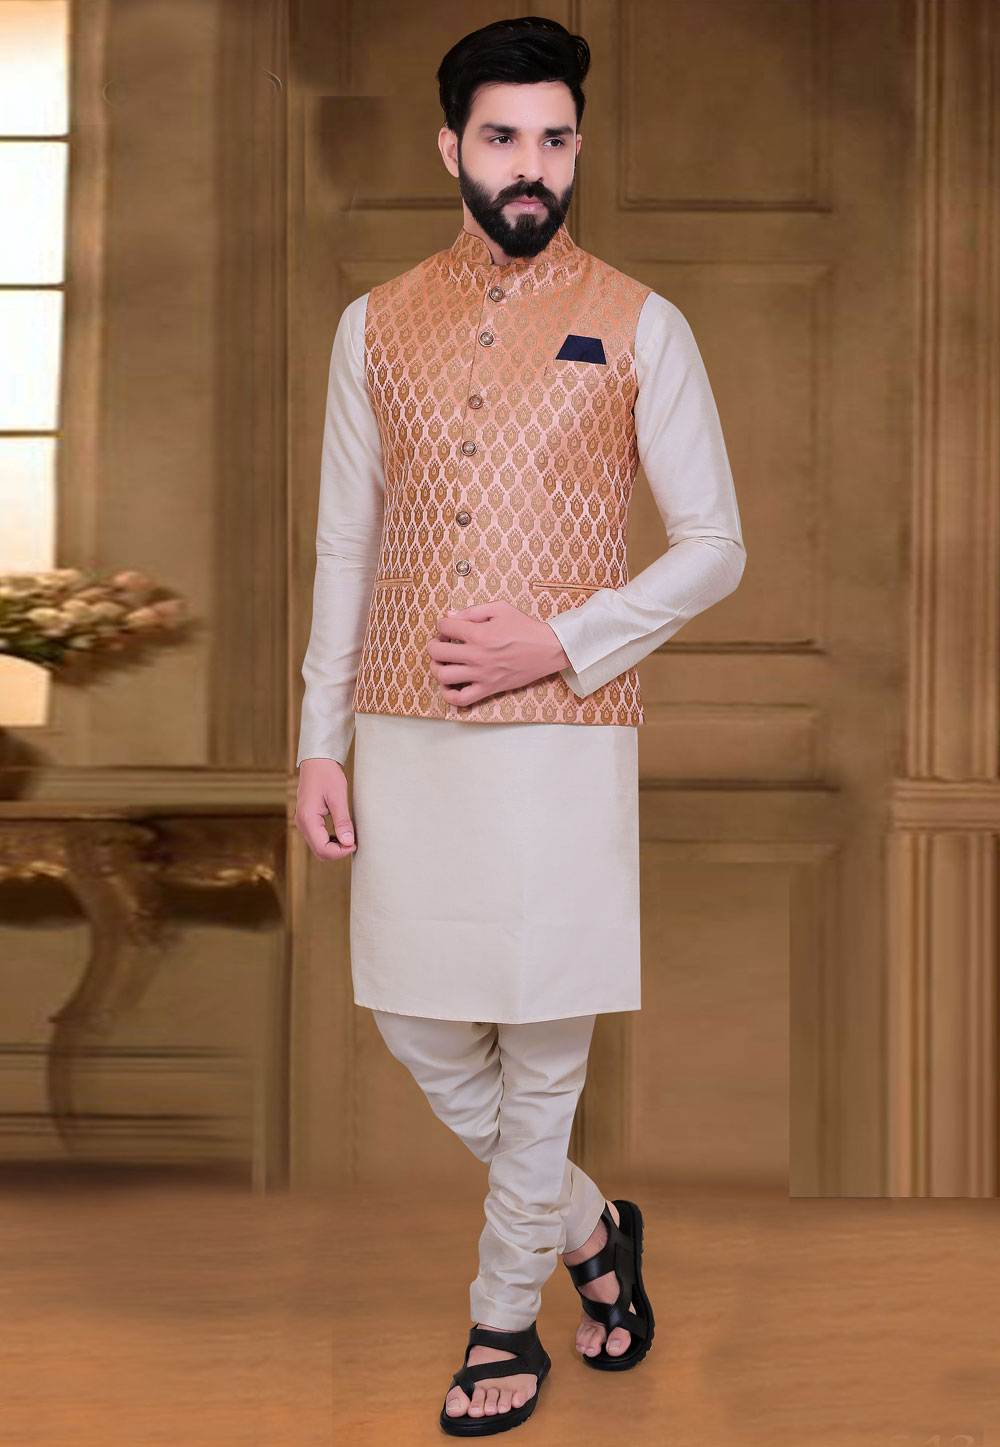 Buy See Designs Men Off White Kurta Pajama And Yellow Sequence Woven Design  Nehru Jacket - SD2NJRPT_27701XS at Amazon.in